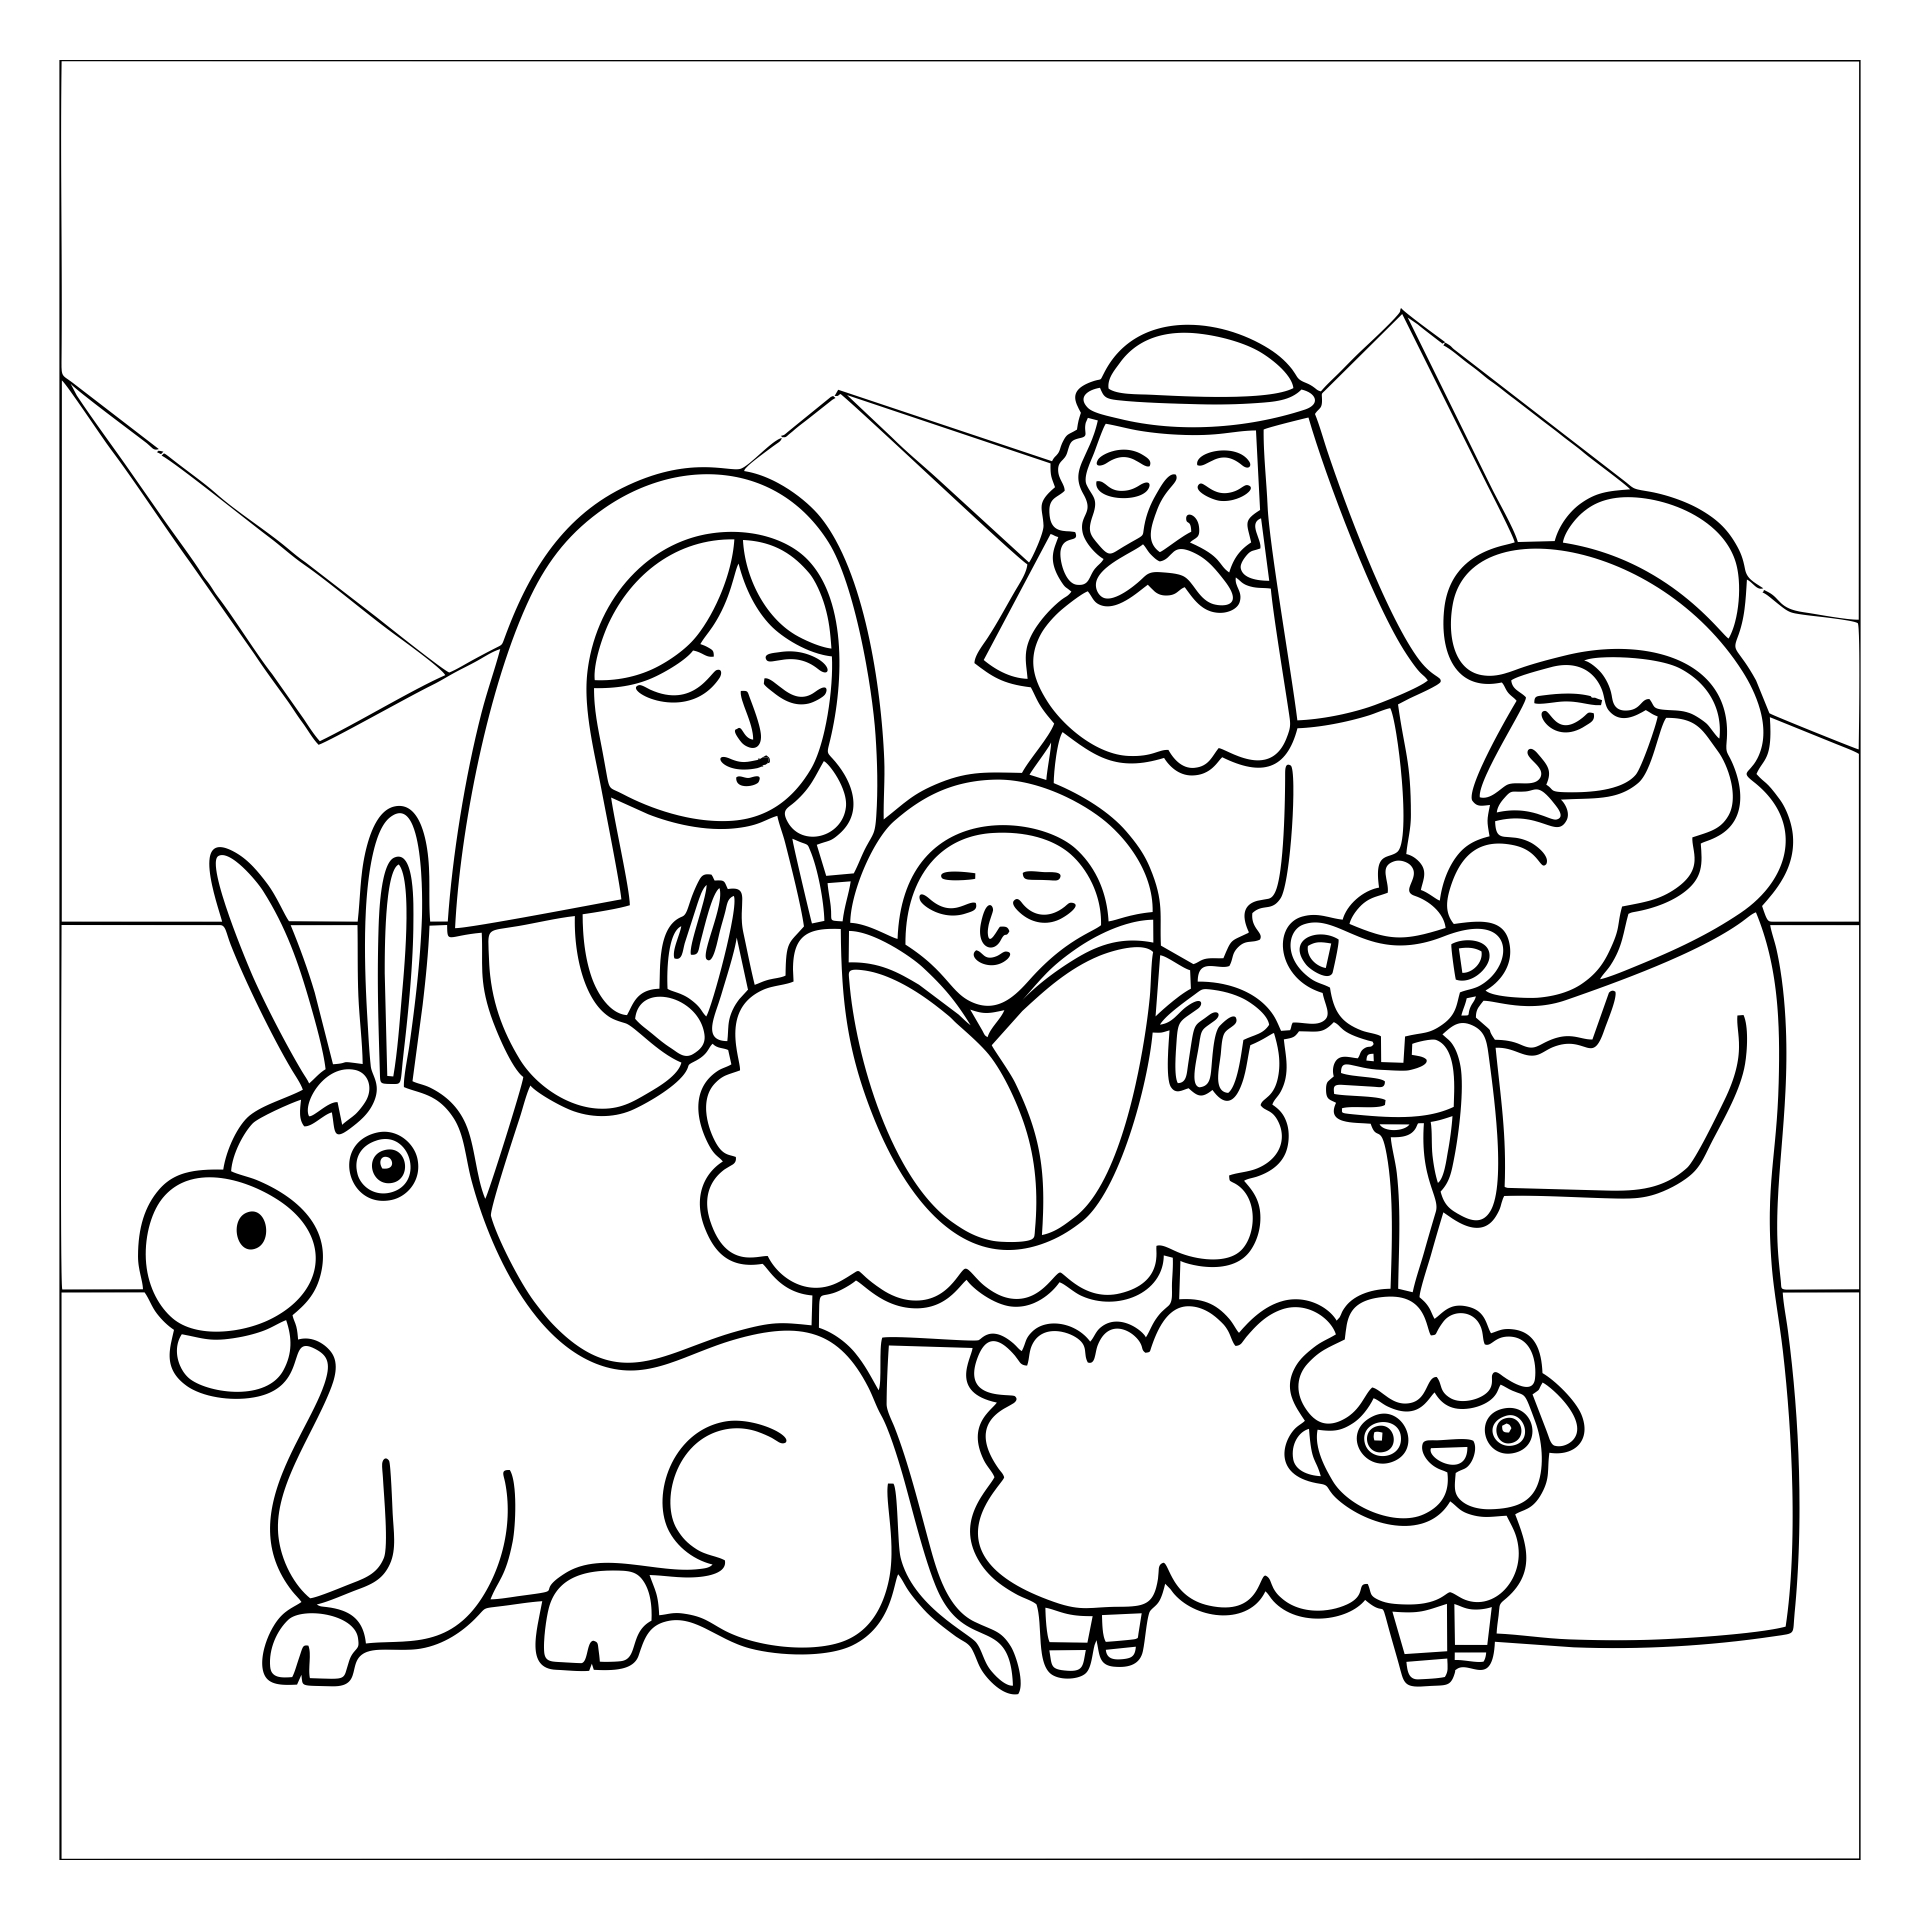 nativity pictures to color Free nativity coloring pages printable